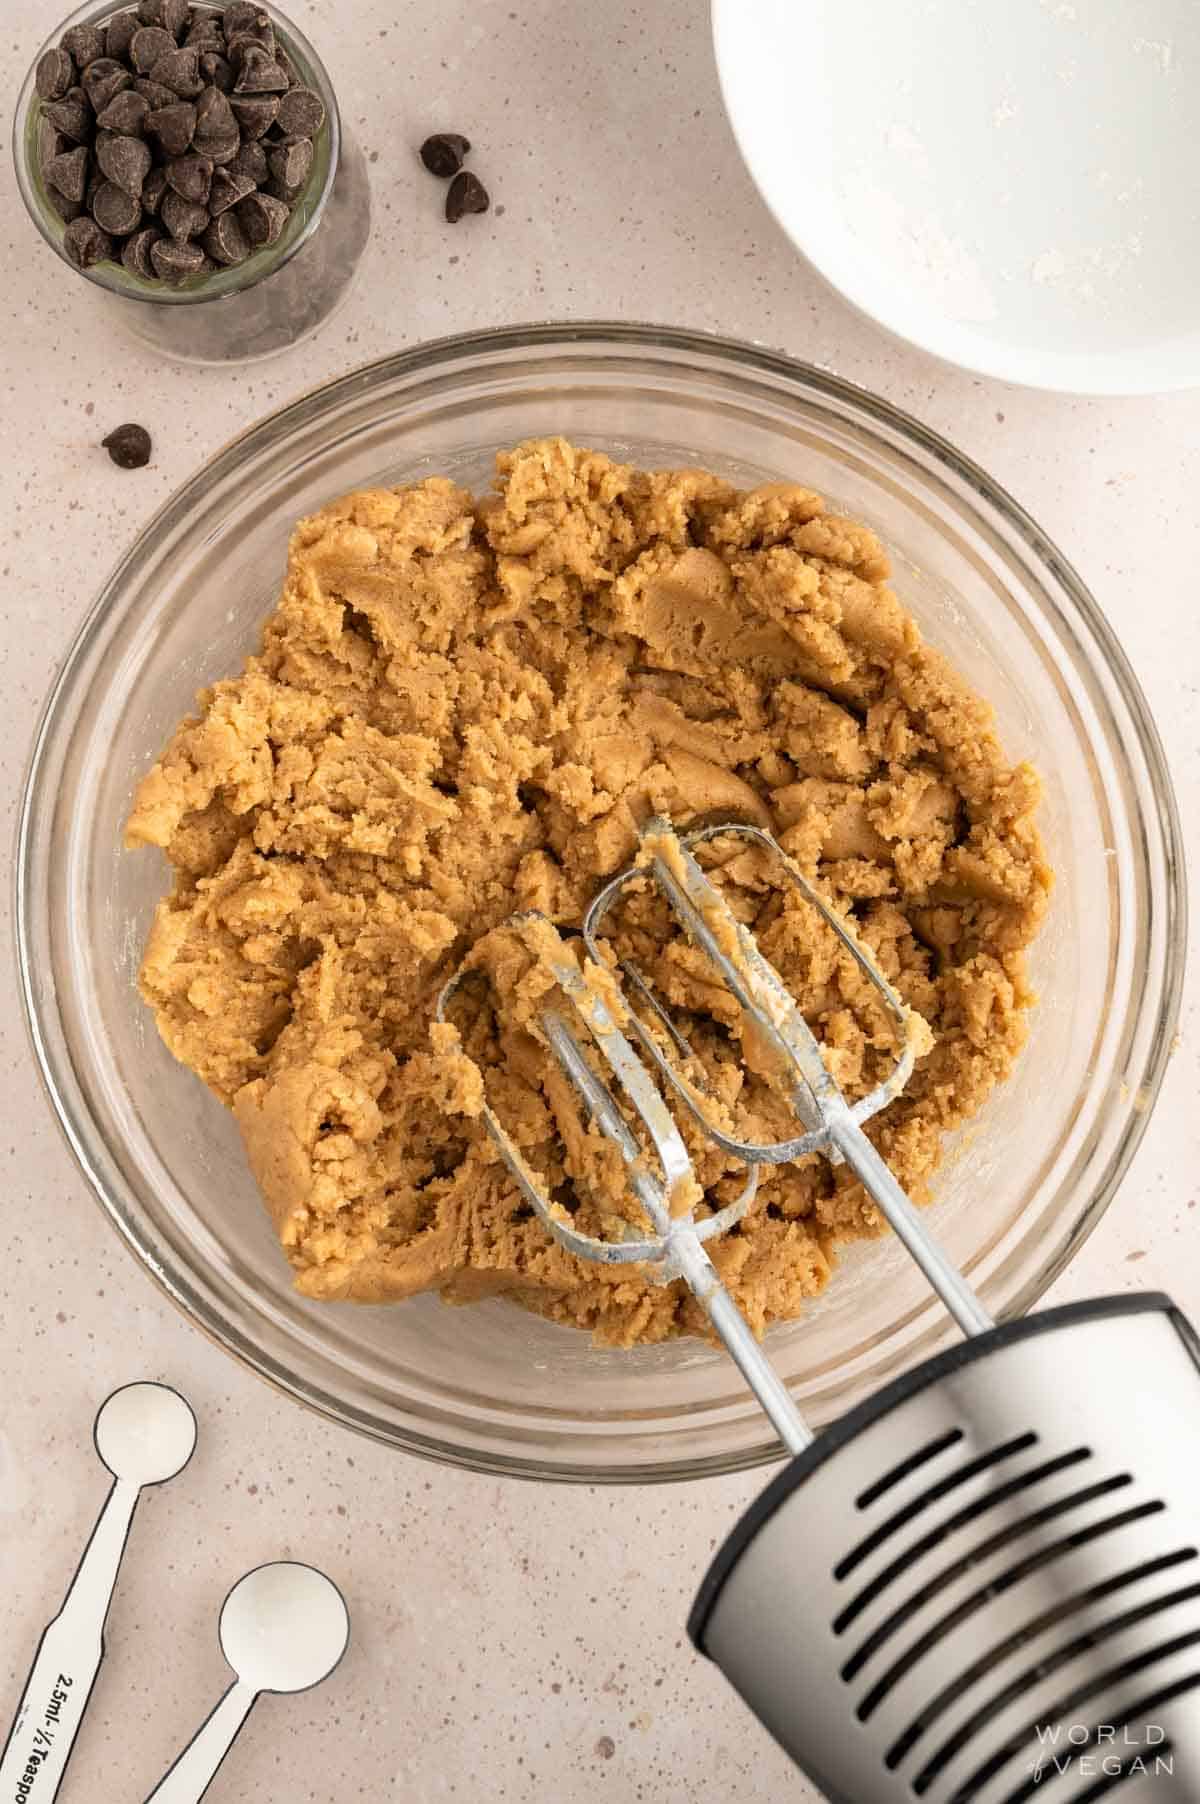 Making peanut butter cookie dough in a glass bowl with a hand mixer.